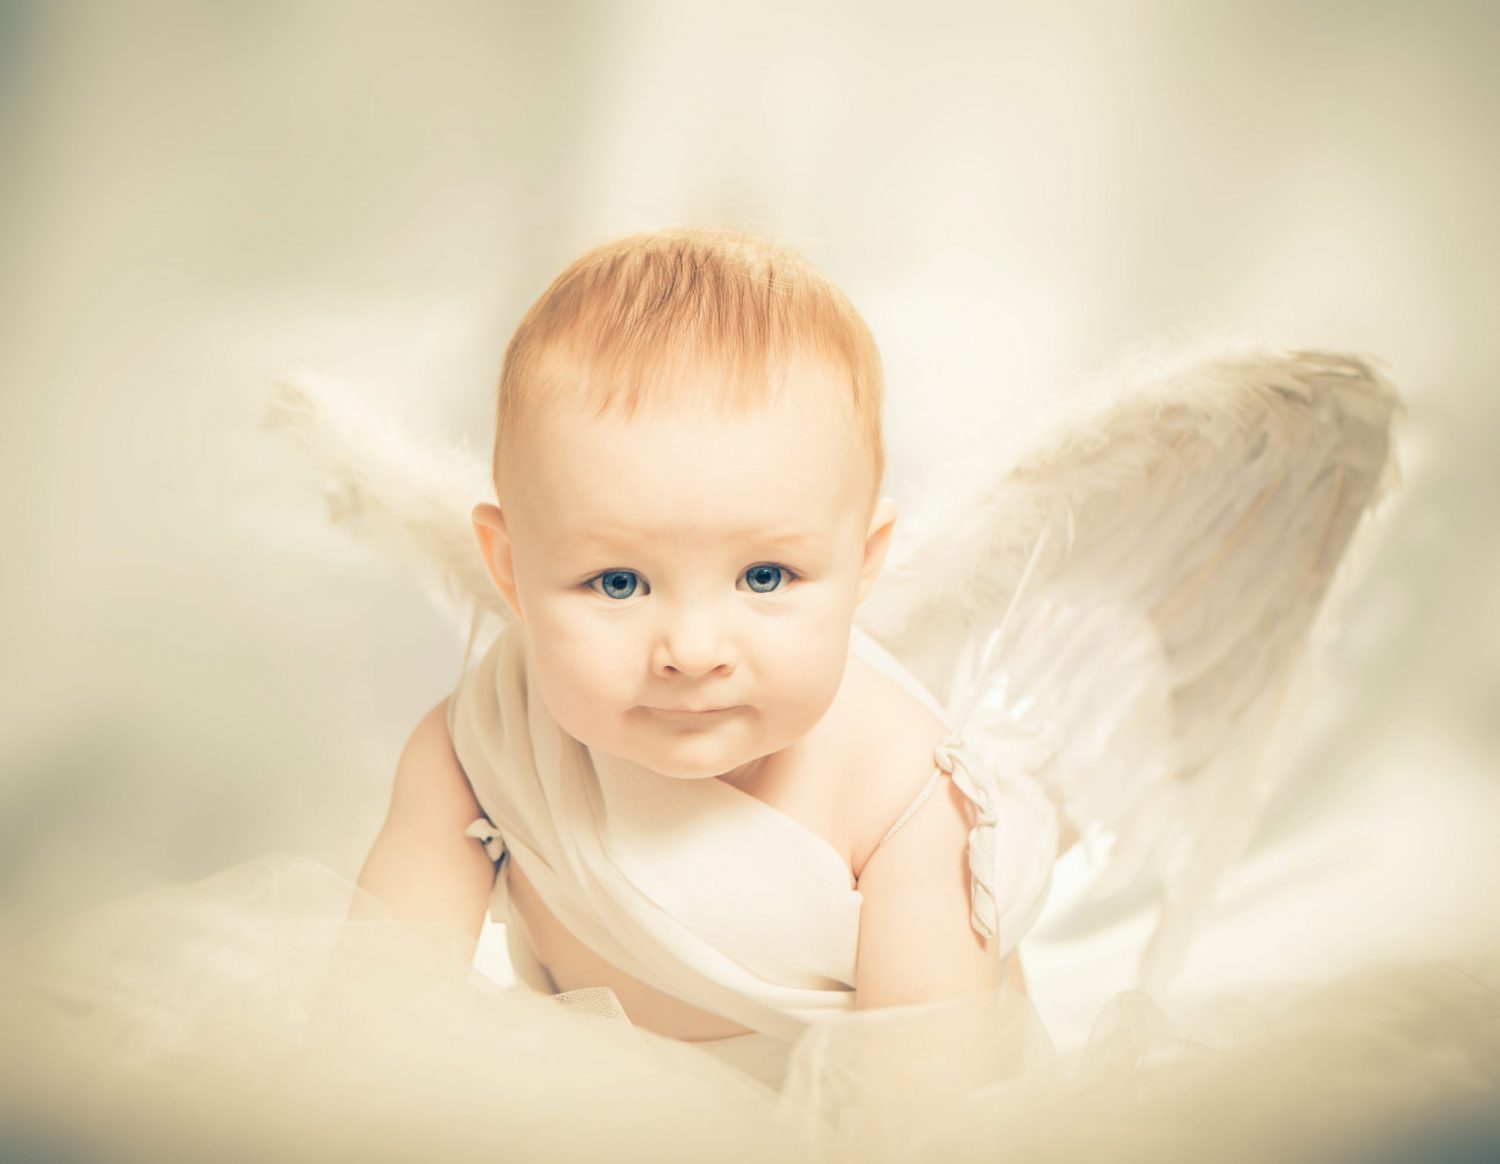 biblical baby girl names meaning gift god